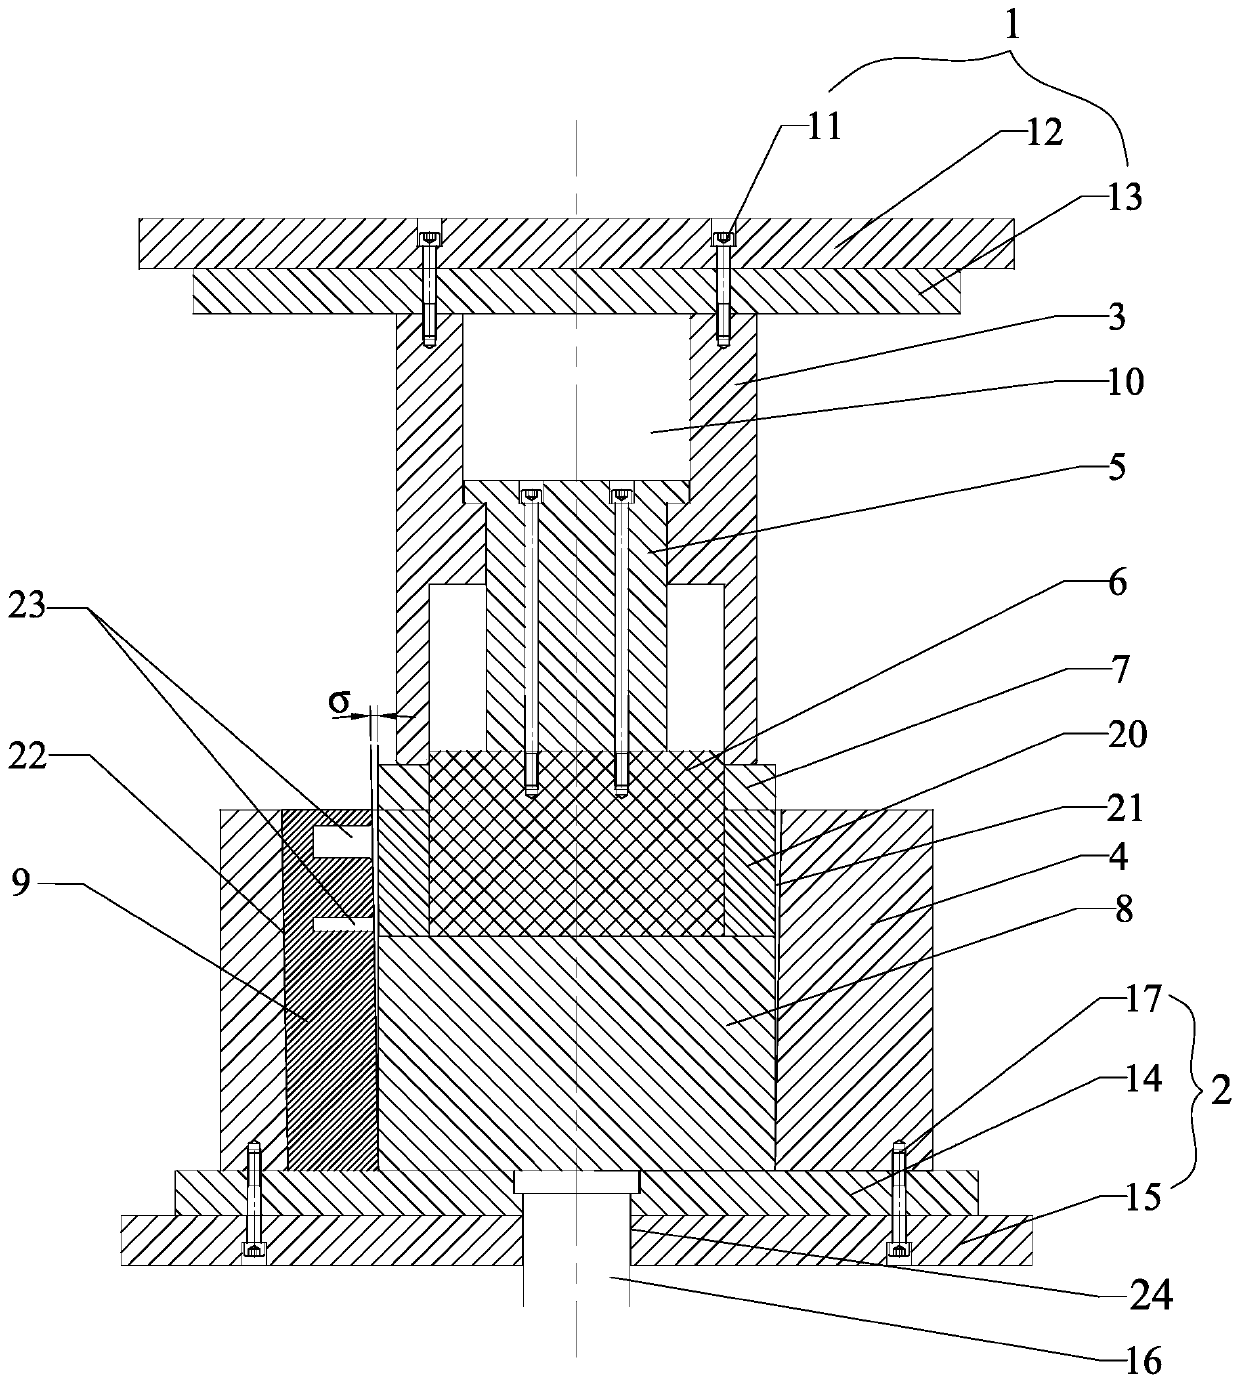 Radial-reverse combined extrusion molding method for thin-walled cylindrical piece with outer bosses